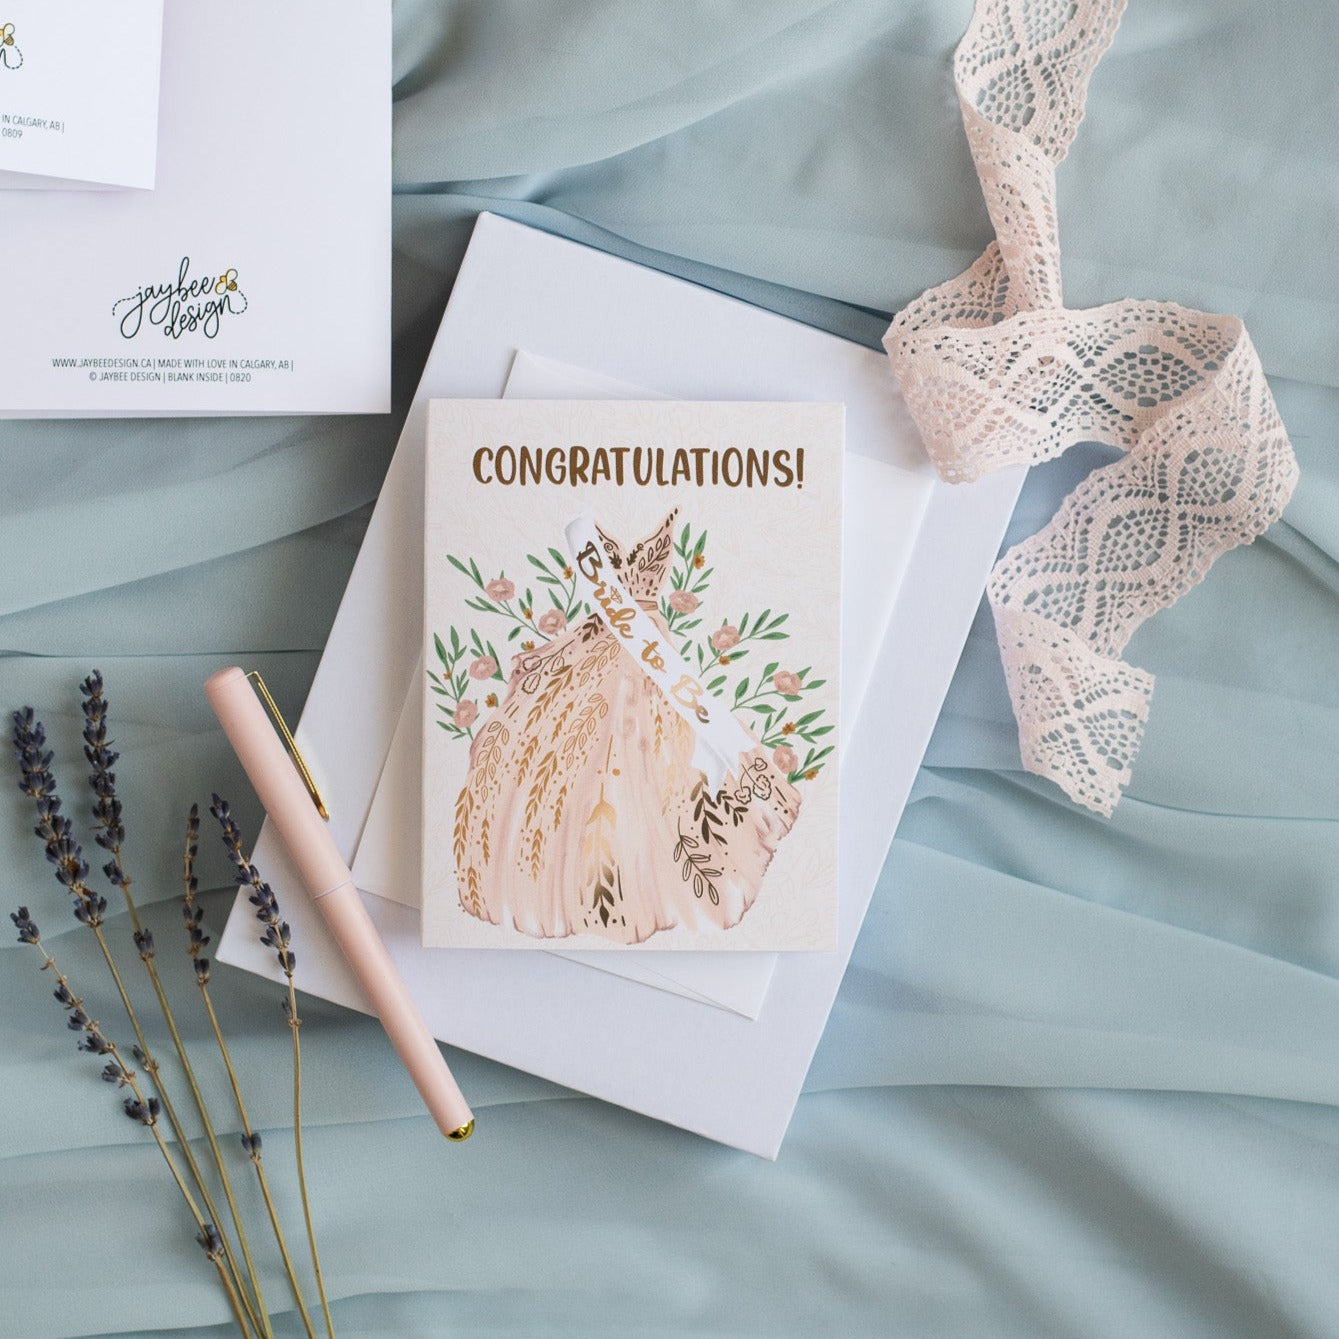 Congratulations! Bride To Be! - Greeting Card